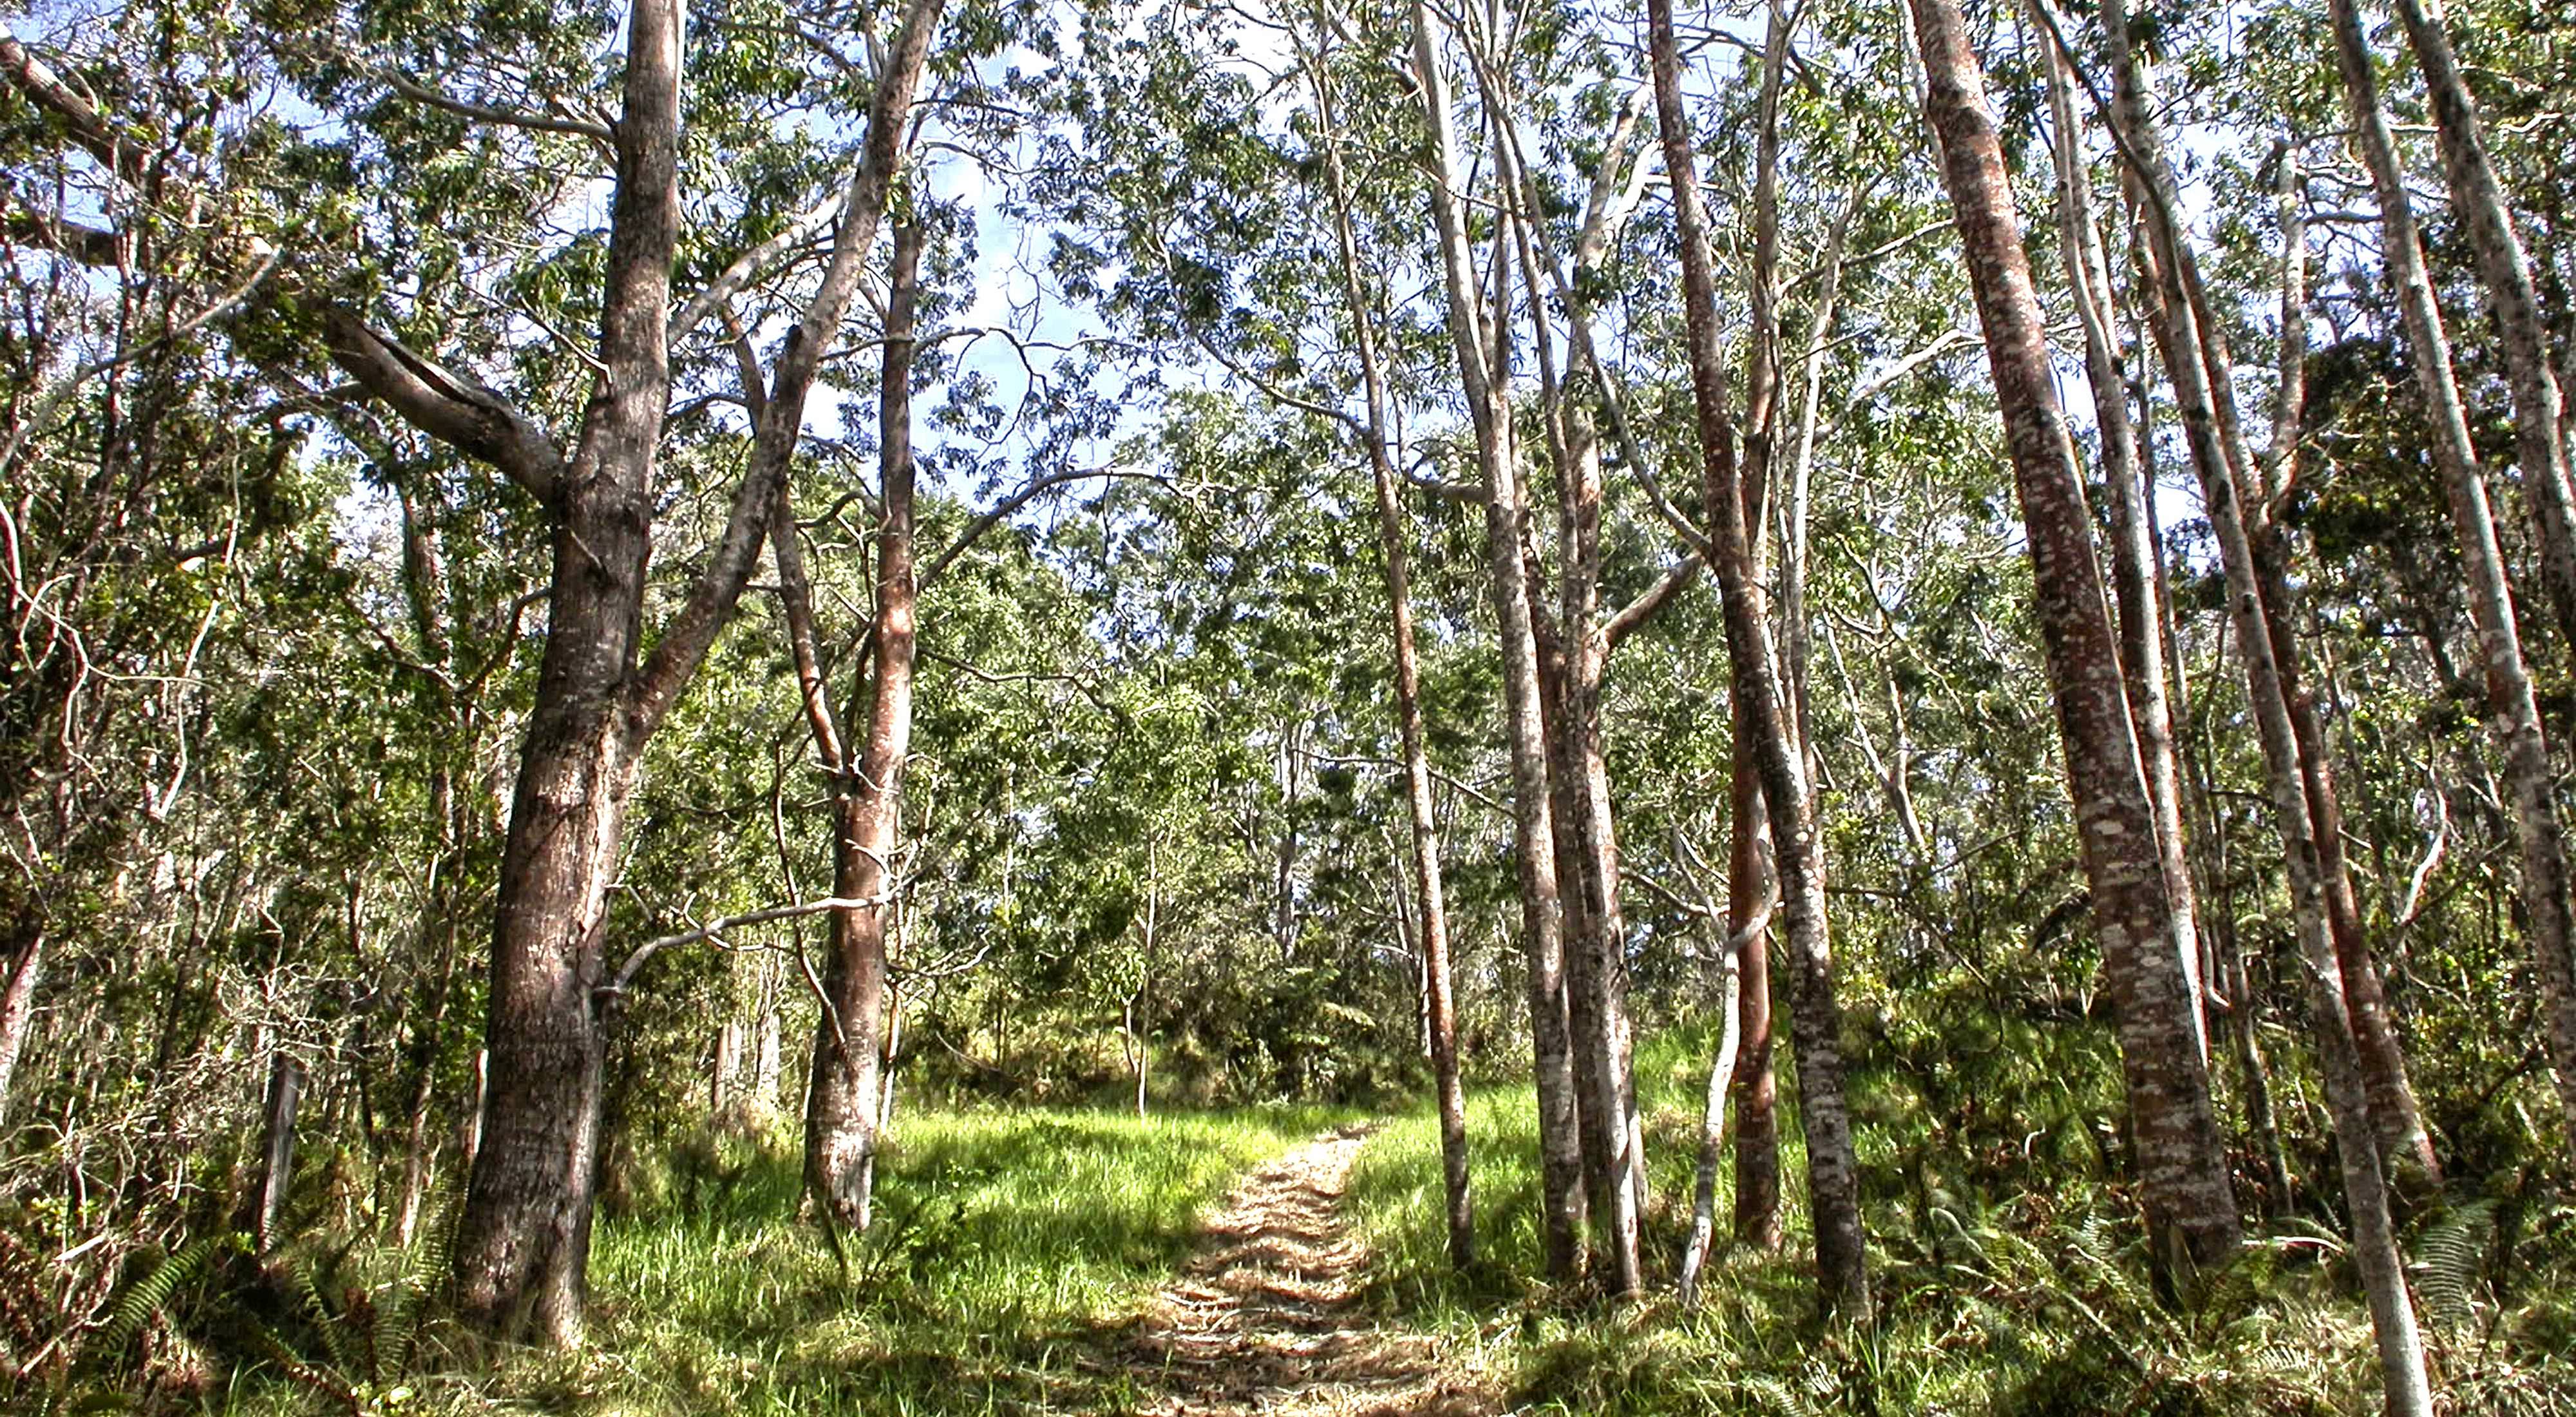 A sun-dappled trail with tall straight trees on either side.